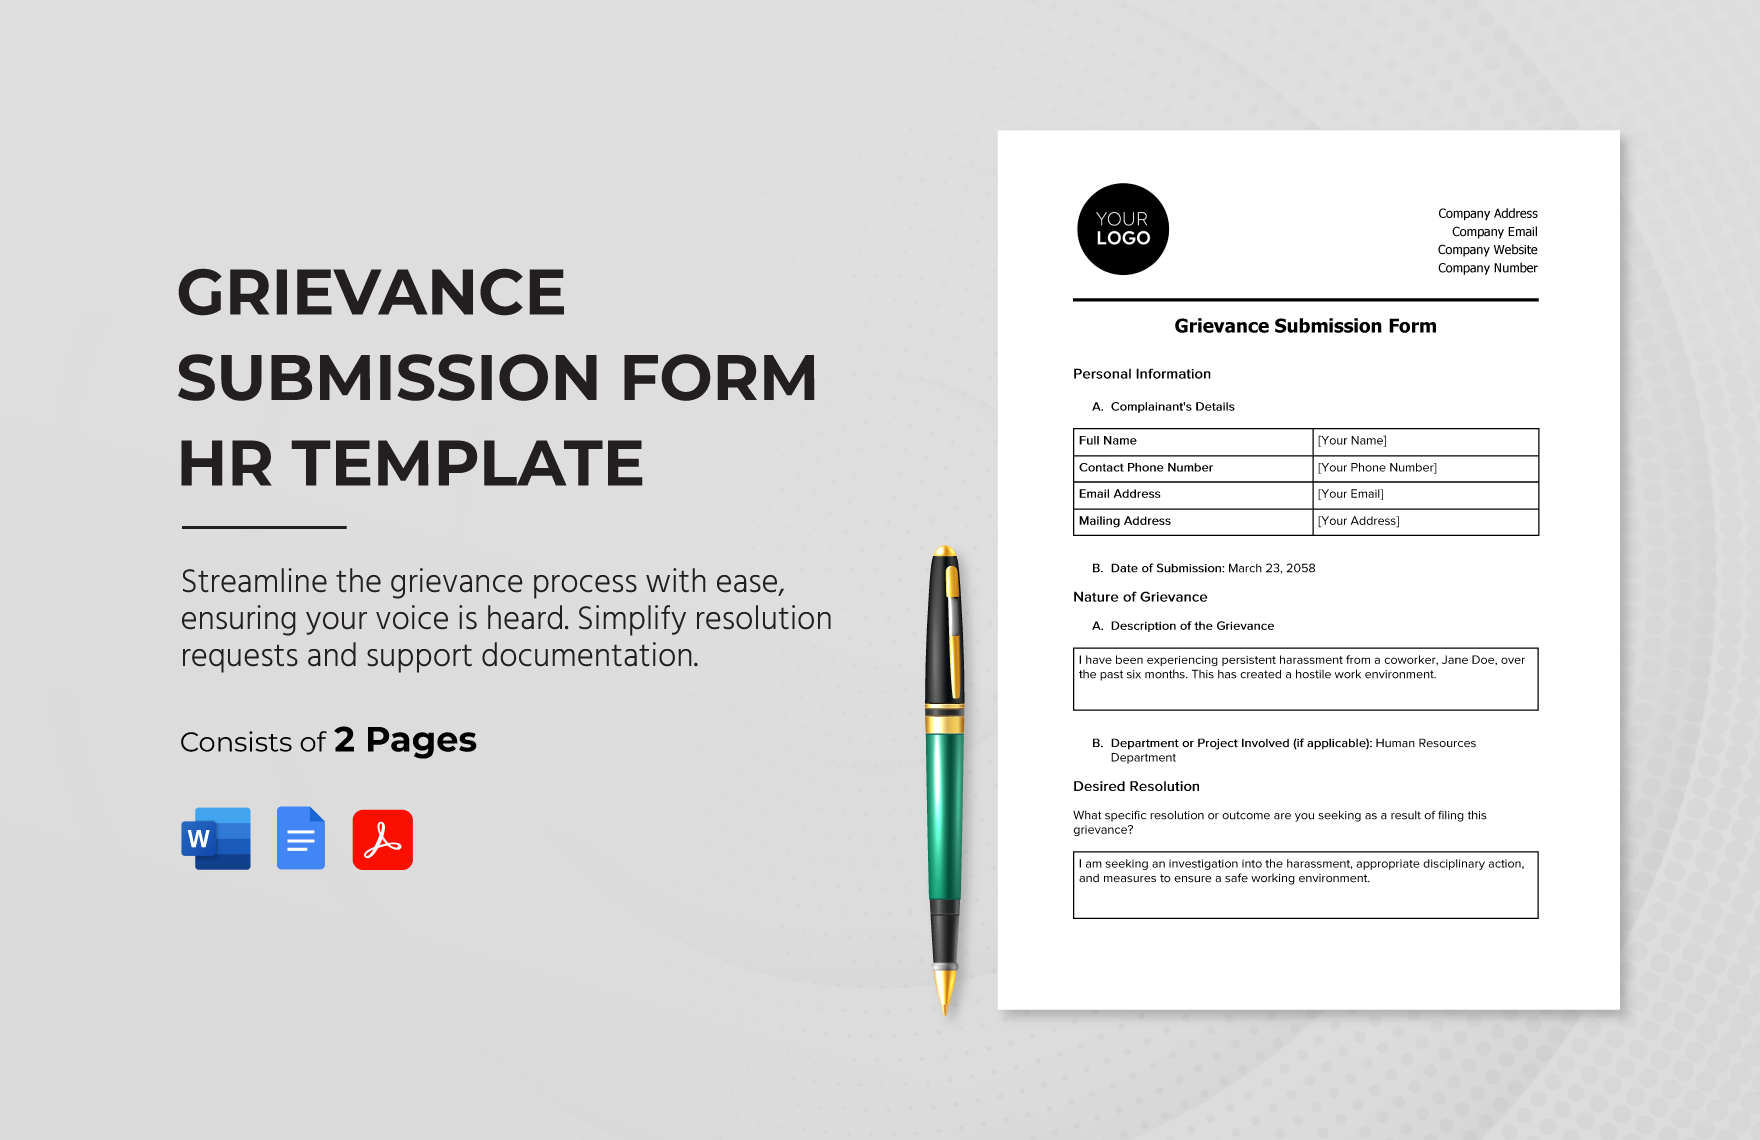 Grievance Submission Form HR Template